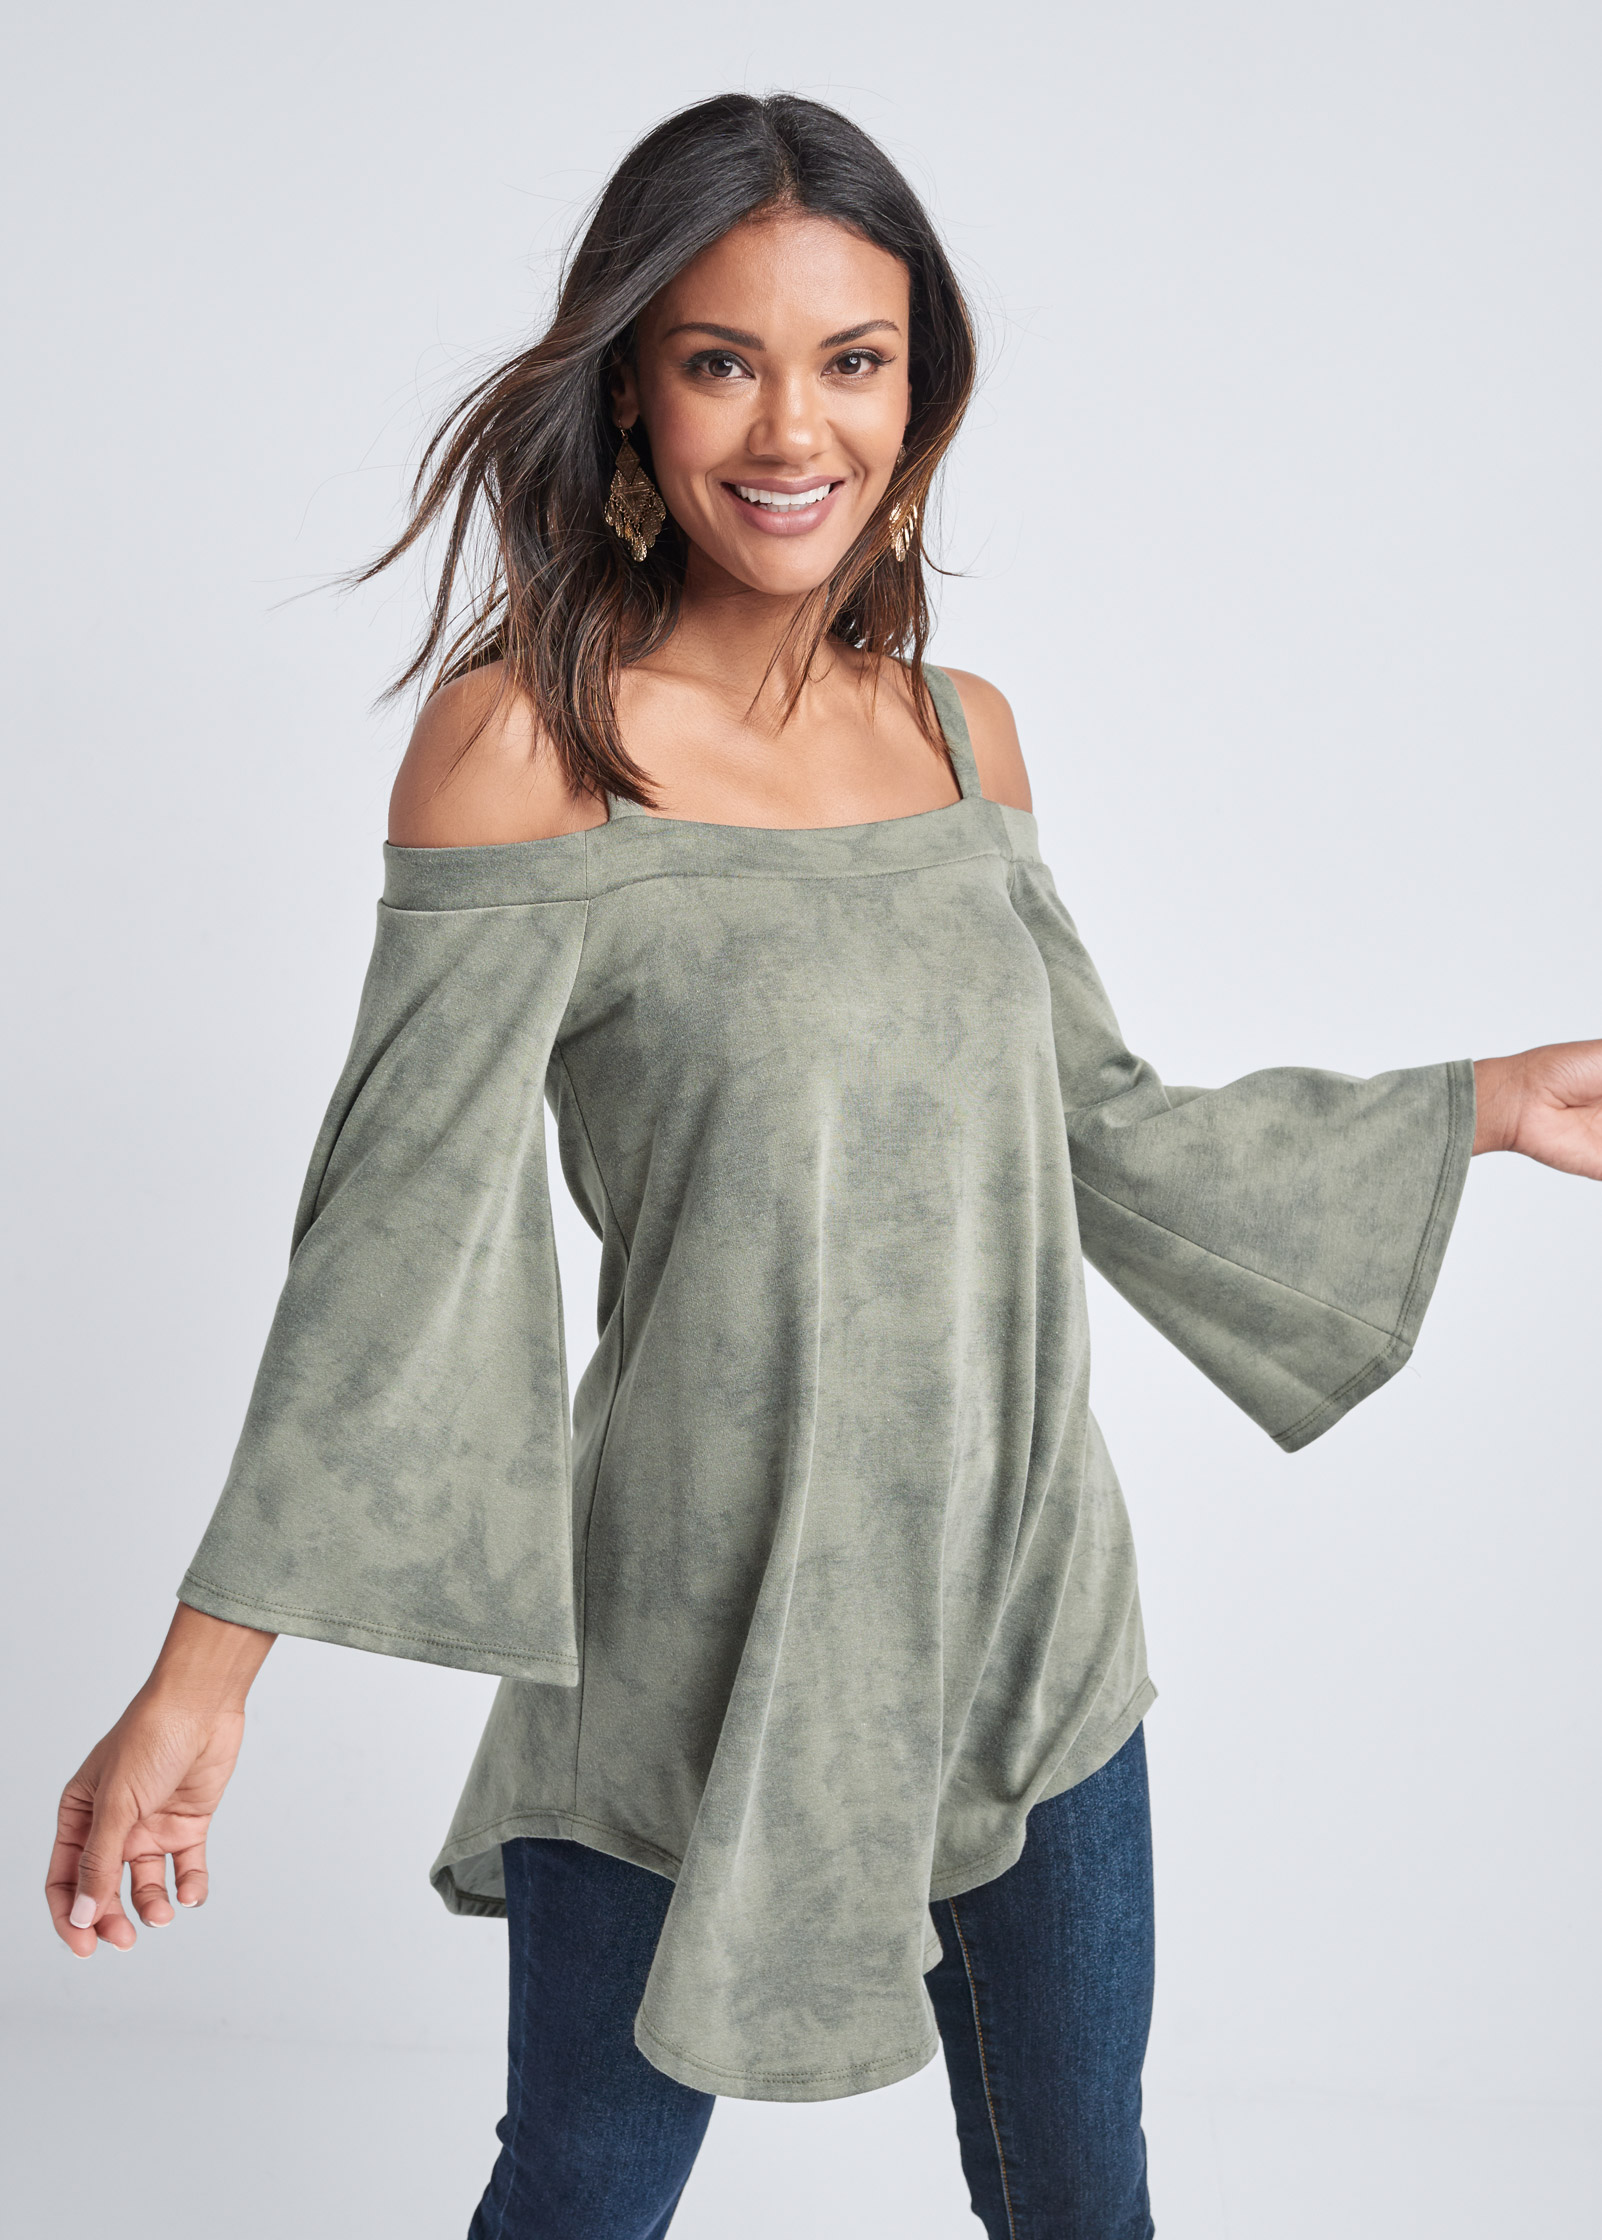 tunic tops for skinny jeans